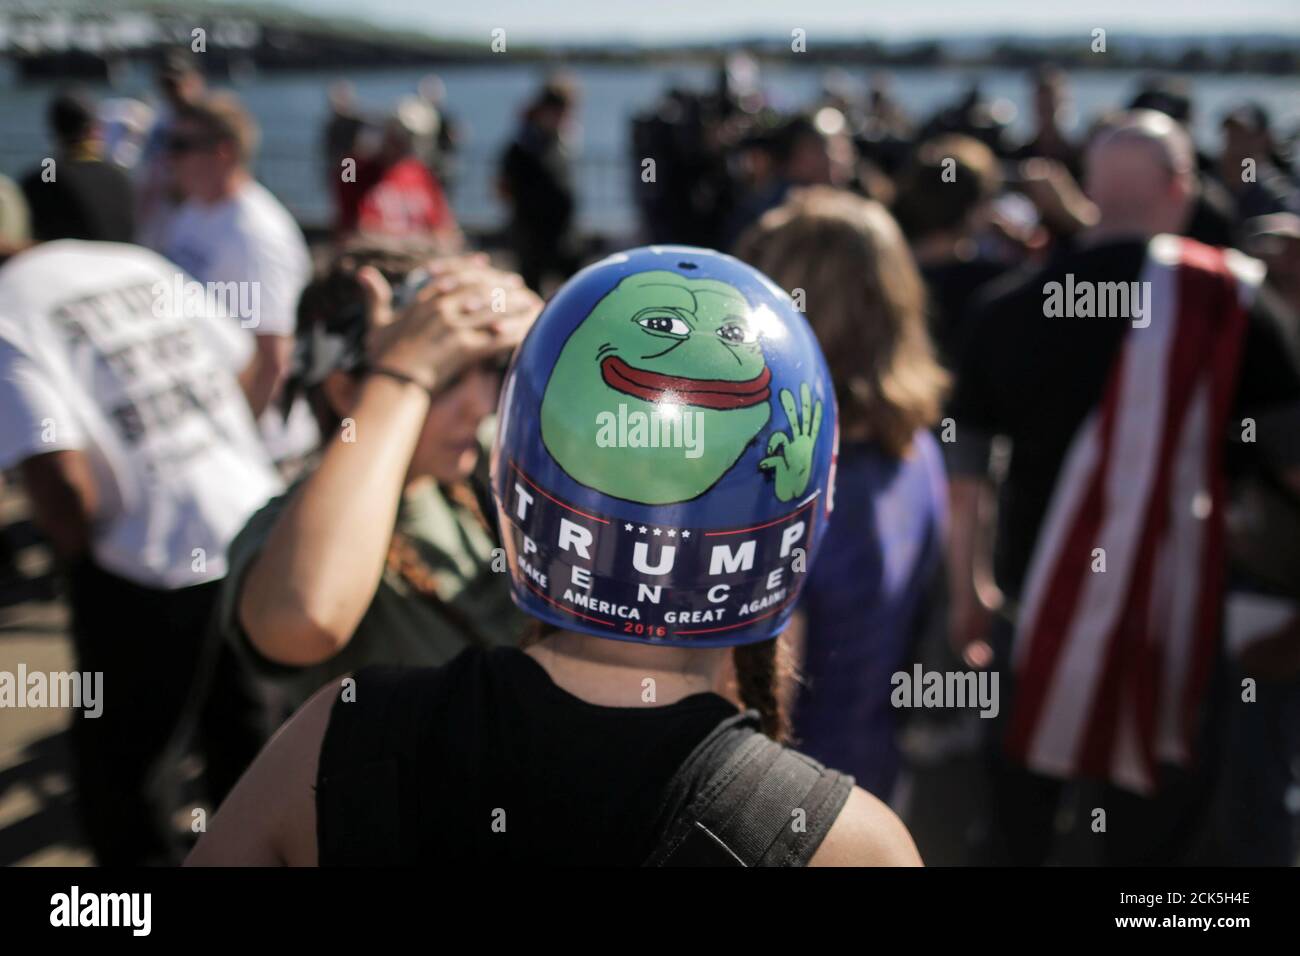 Jaeda Ferrel, of Seattle, wears a helmet adorned with an image of Pepe the frog that she hand-painted and a Trump/Pence sticker at a rally organized by the right-wing group Patriot Prayer in Vancouver, Washington, U.S. September 10, 2017. REUTERS/Elijah Nouvelage Stock Photo